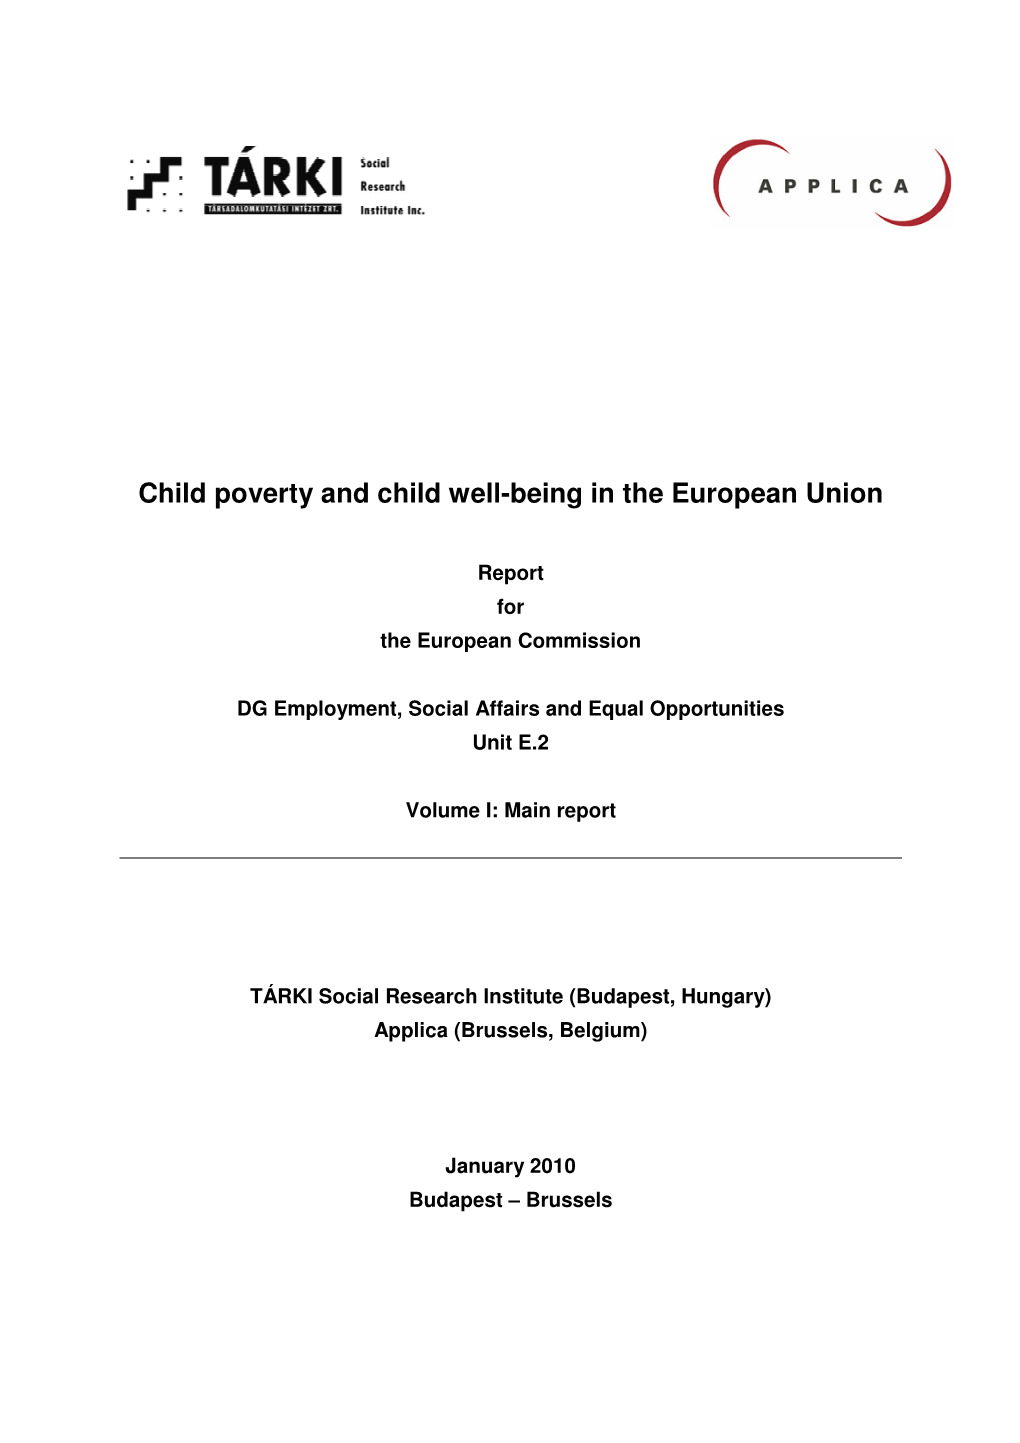 Child Poverty and Child Well-Being in the European Union